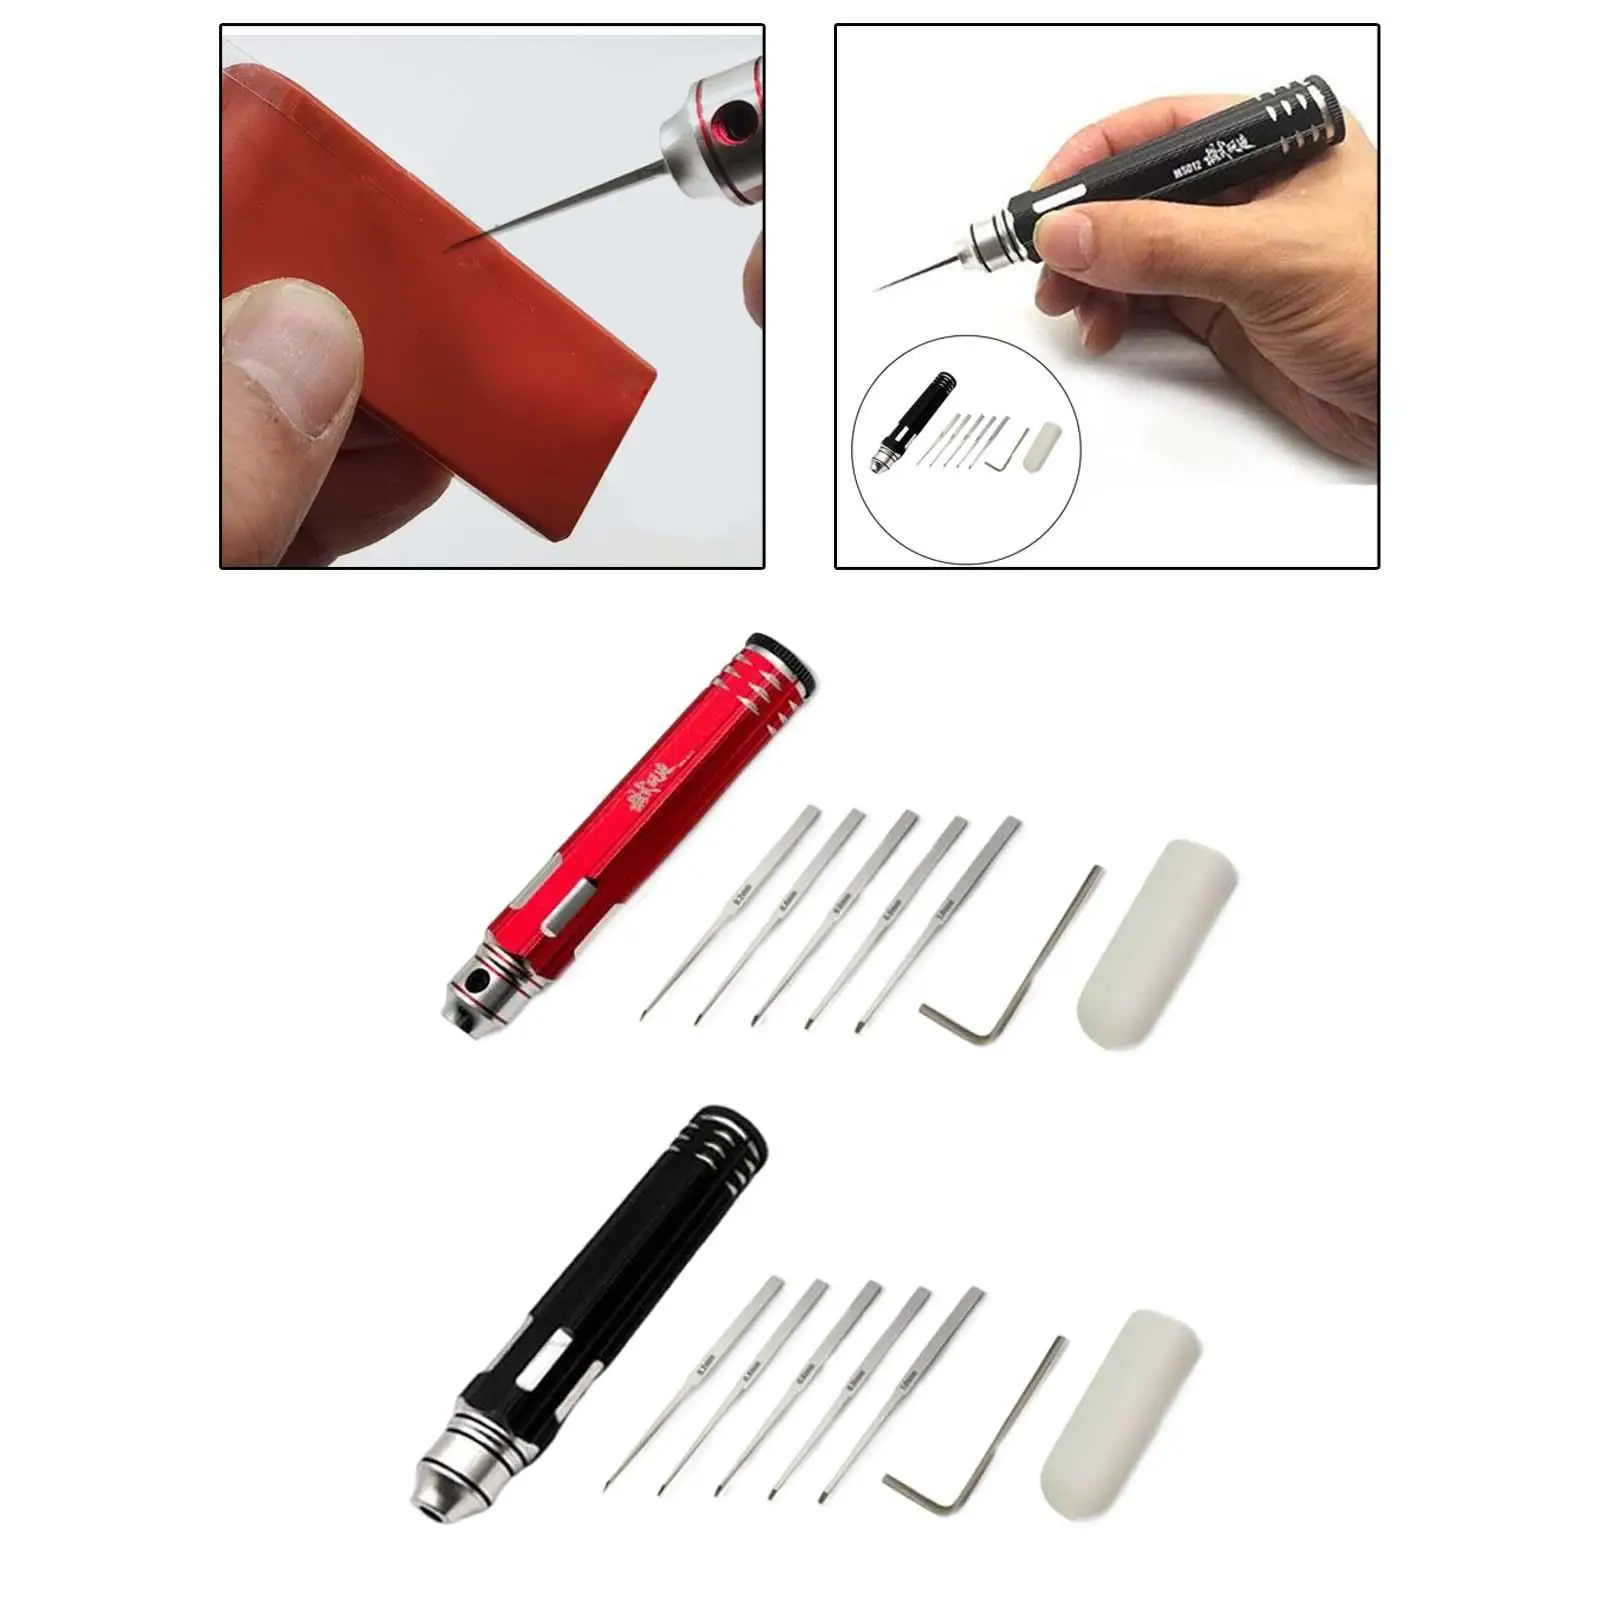 Model Scriber Nicking Tool Kit Model Cutting Tools Scribe Line Tool with 0.2/0.4/0.6/0.8/1mm Blade for Hobby Building Repairing